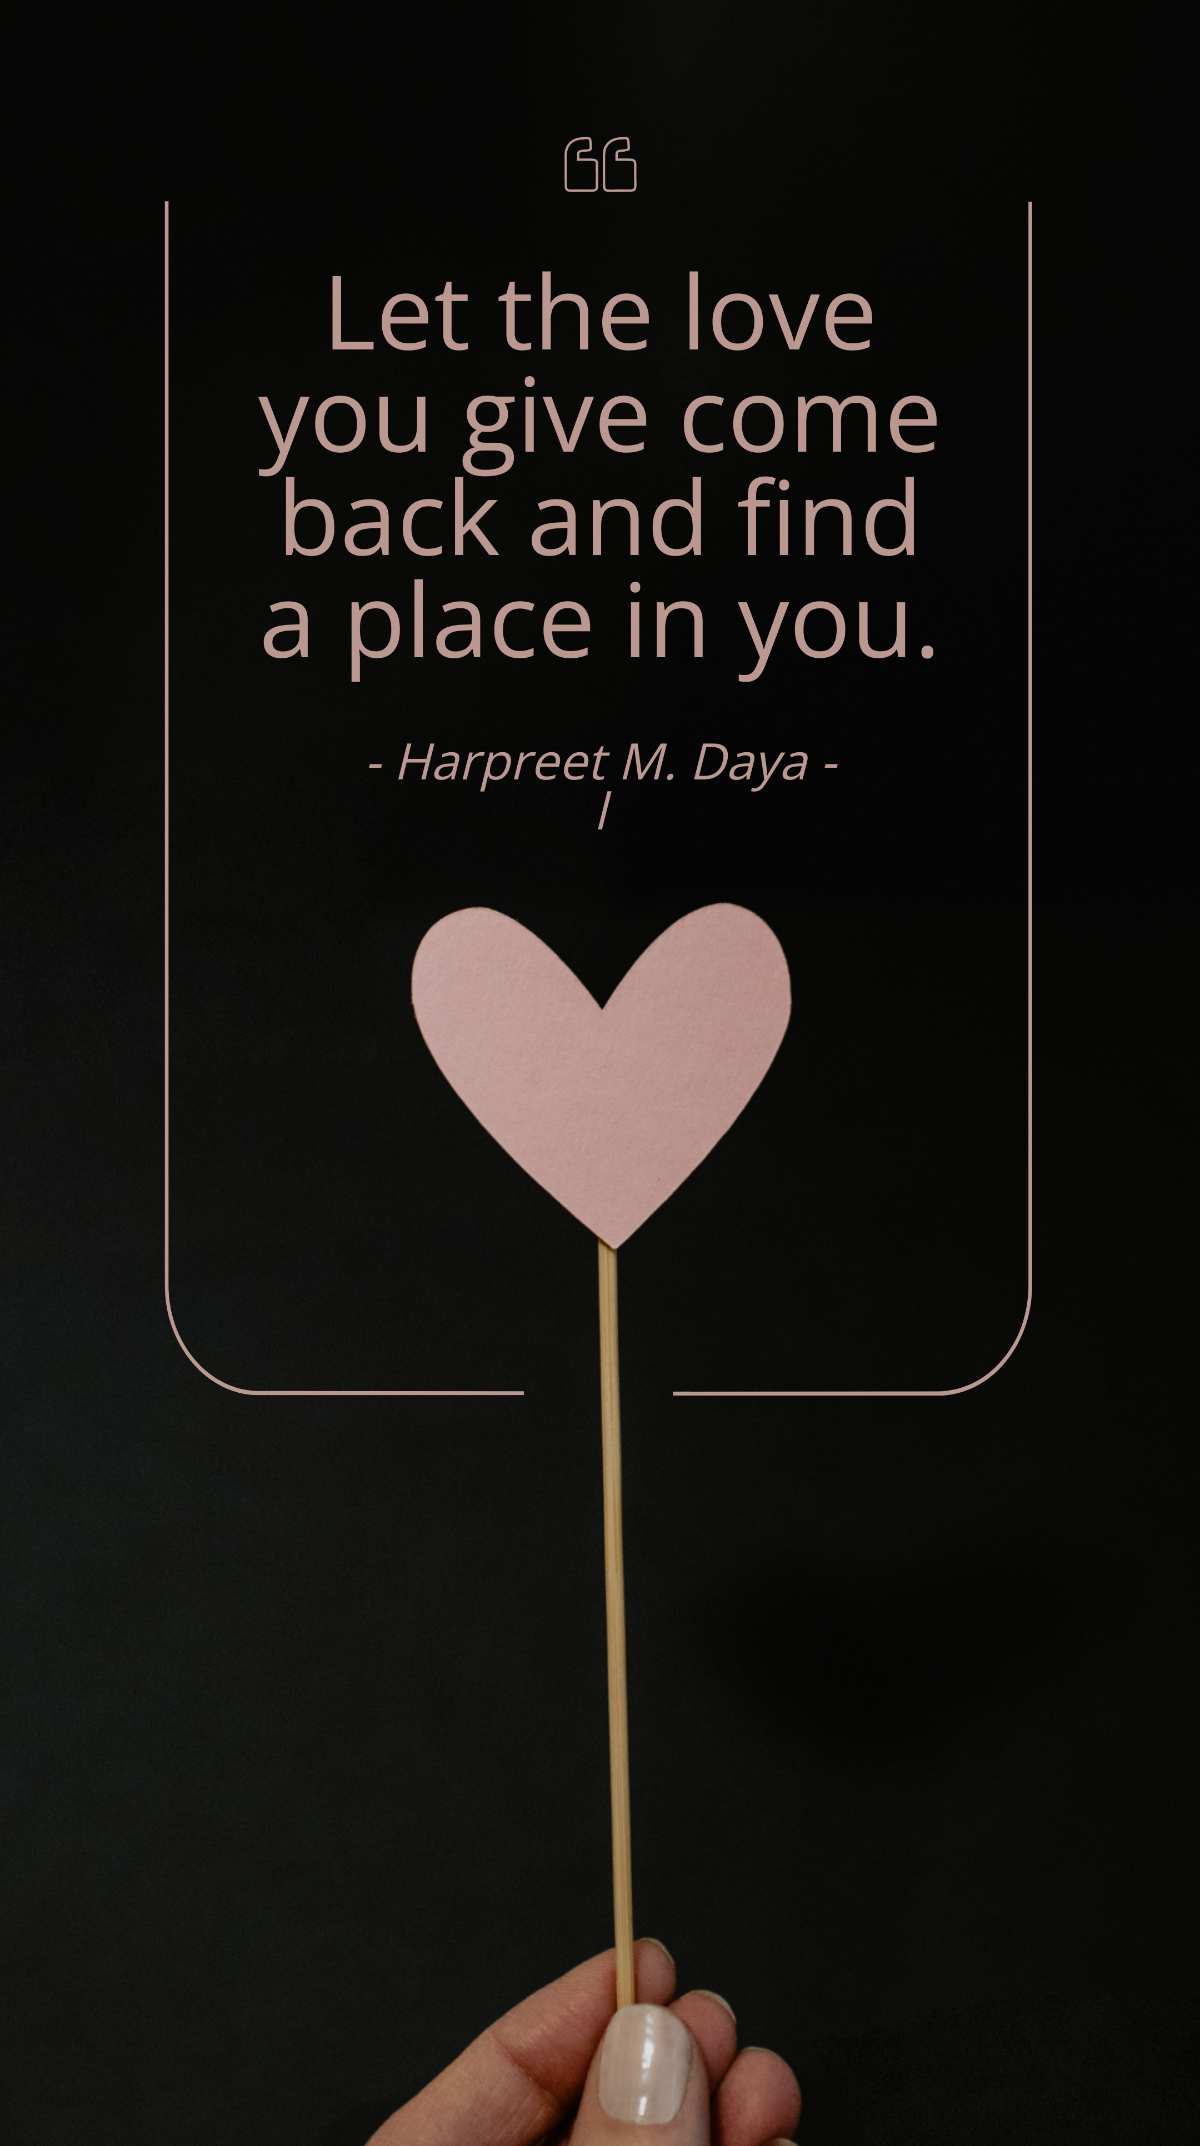 Harpreet M. Dayal - Let the love you give come back and find a place in you. Template